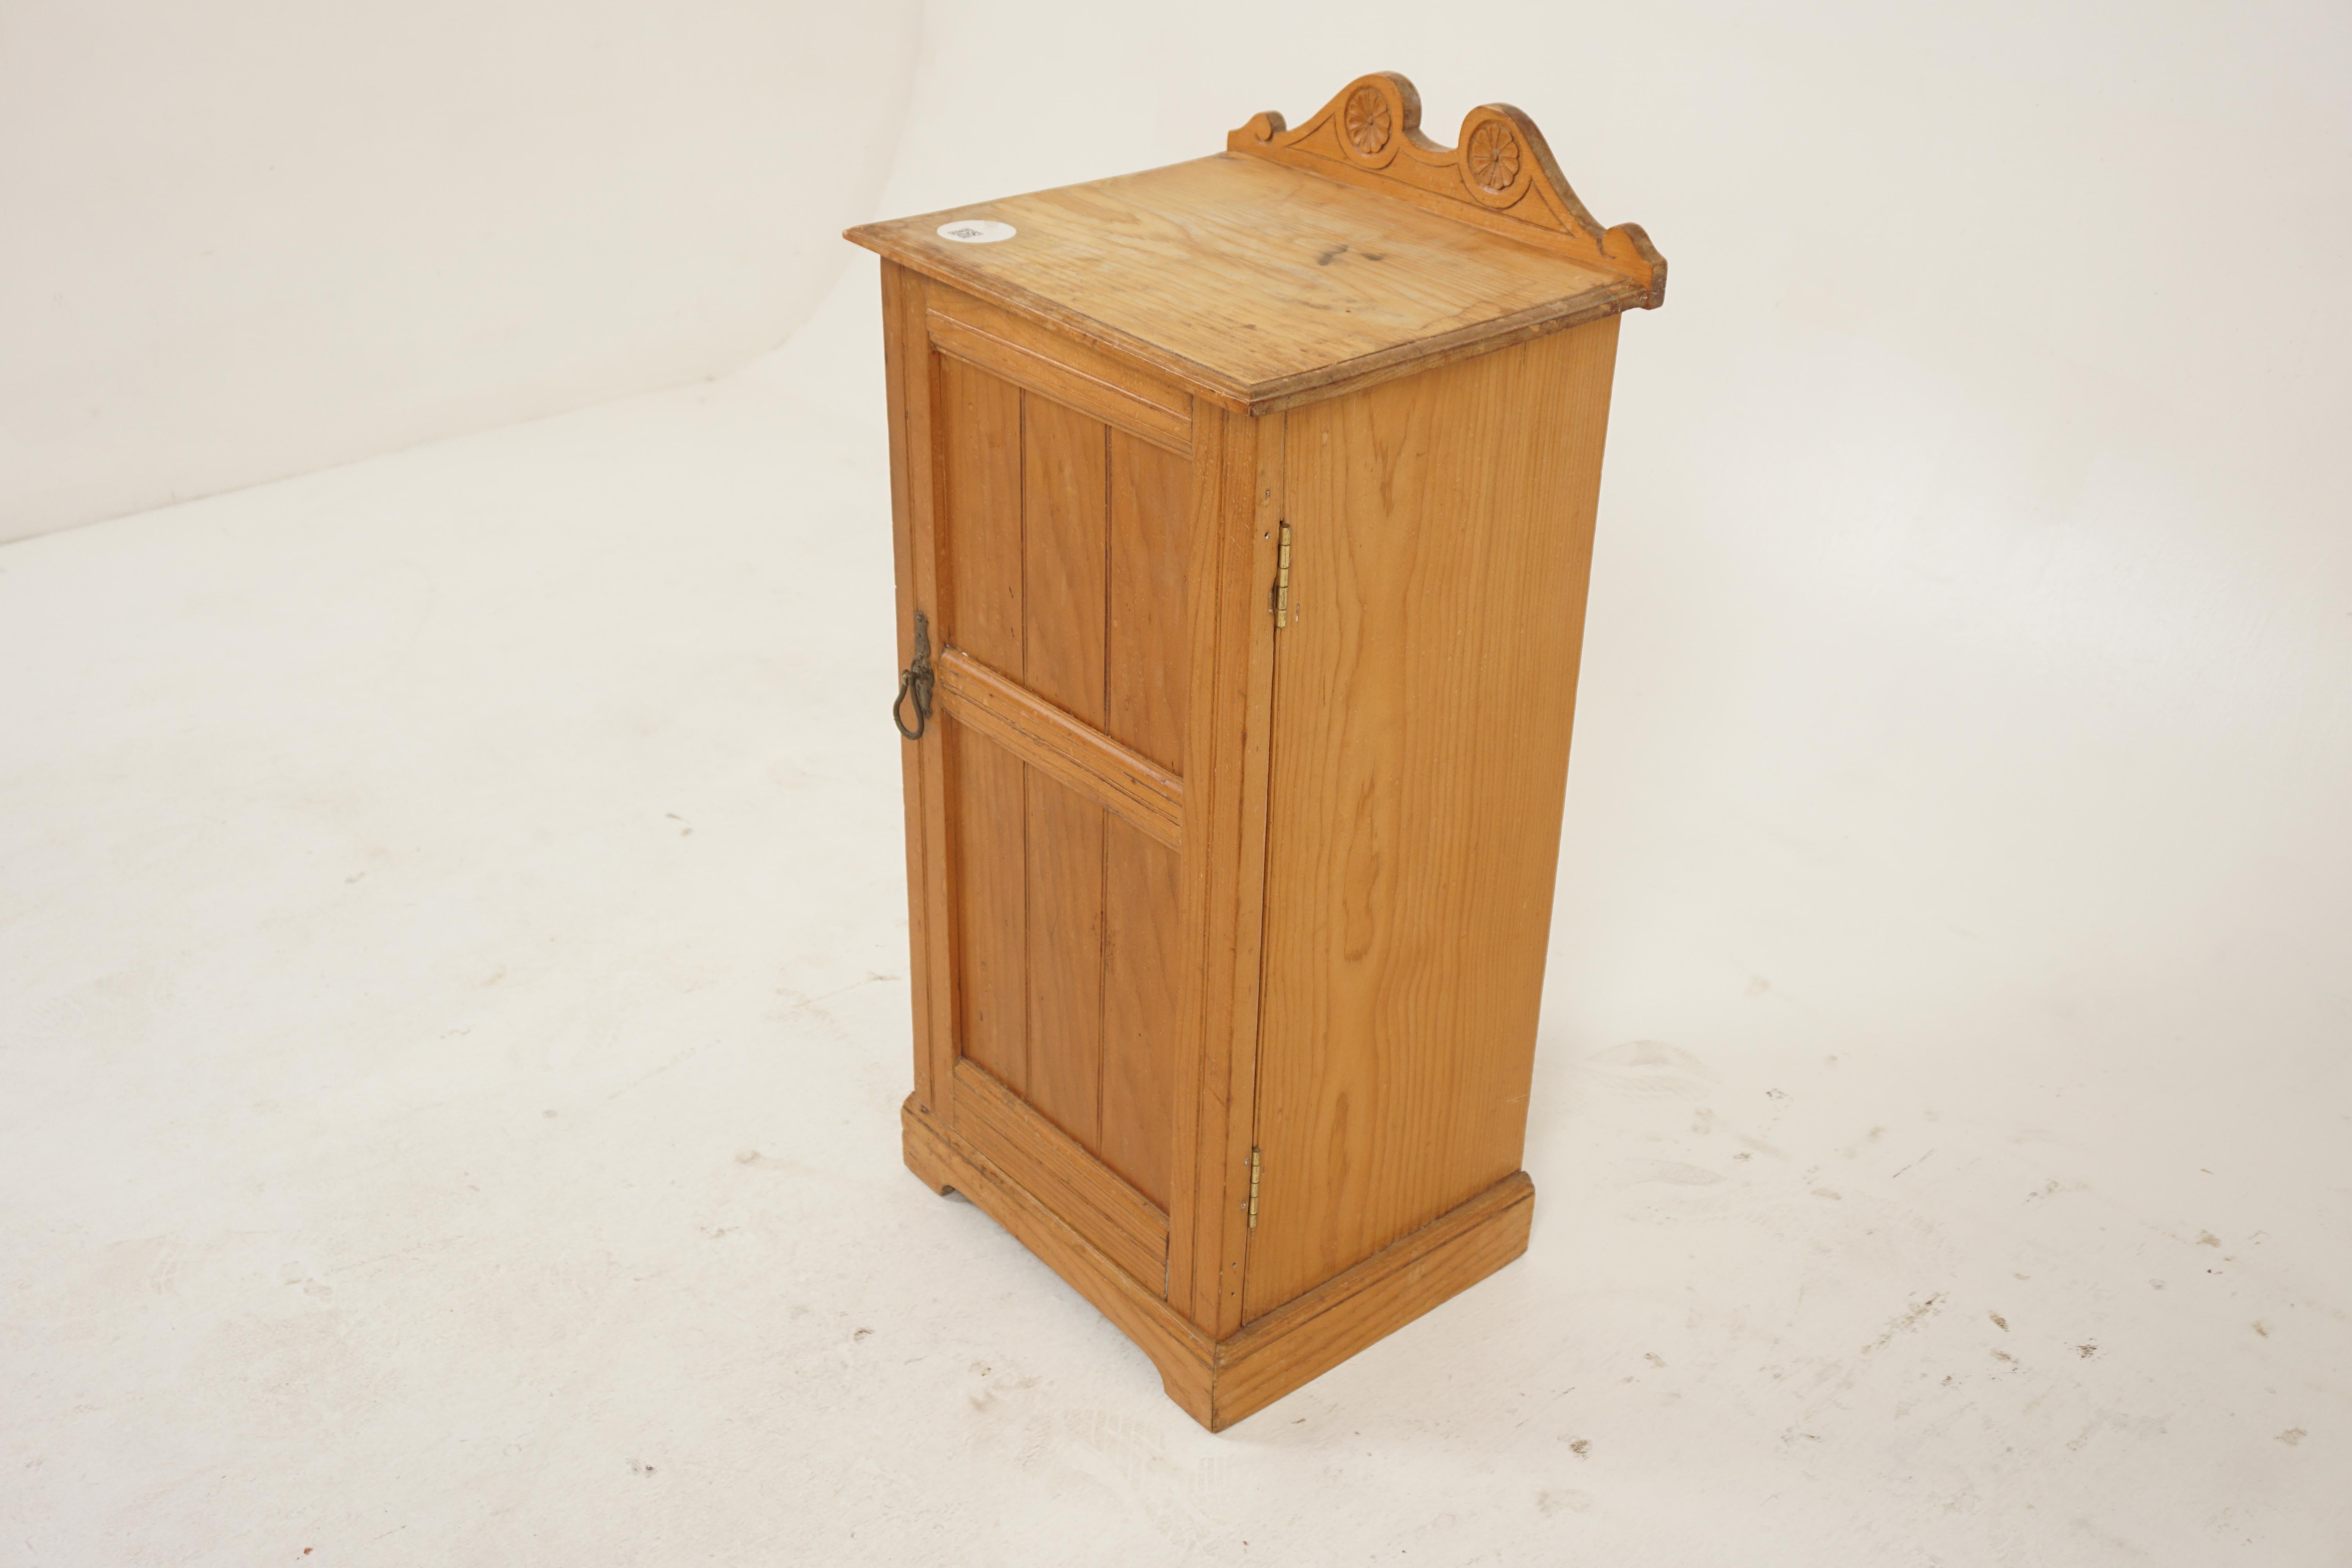 Antique Victorian Pine Bedside, Lamp, End Table,  Scotland 1890, H1143

Solid Pine
Original finish
Rectangular moulded top with edge
Carved shaped pediment on back
Panelled door below with original handle
Opens to reveal a single pine storage